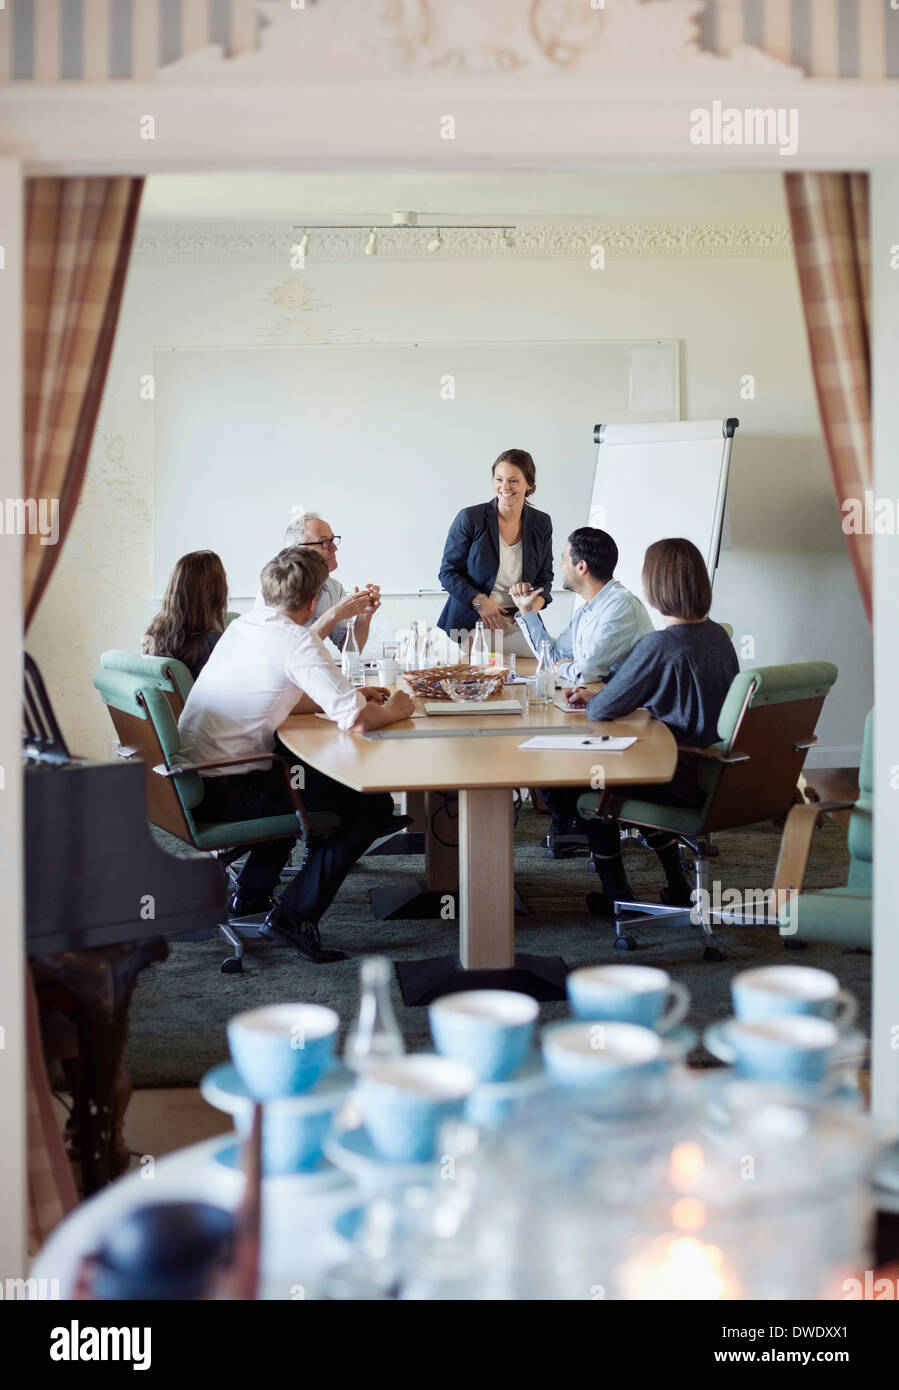 View of business people in conference meeting through doorway Stock Photo